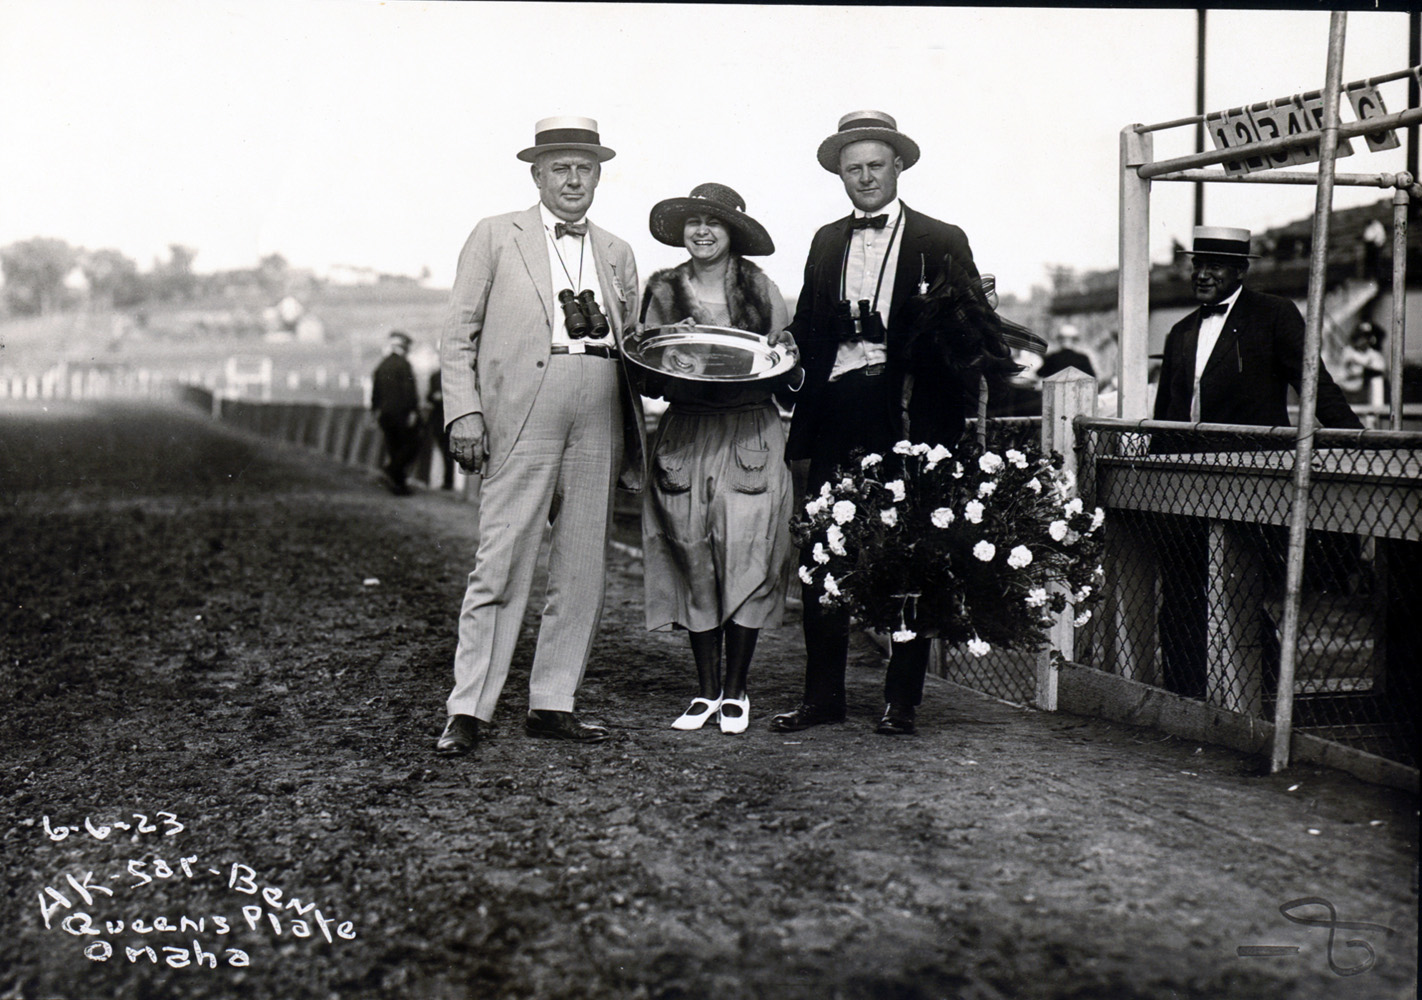 Ben Jones (on right) during the trophy presentation for the Queens Plate at Ak-Sar-Ben in June 1923 (Museum Collection)